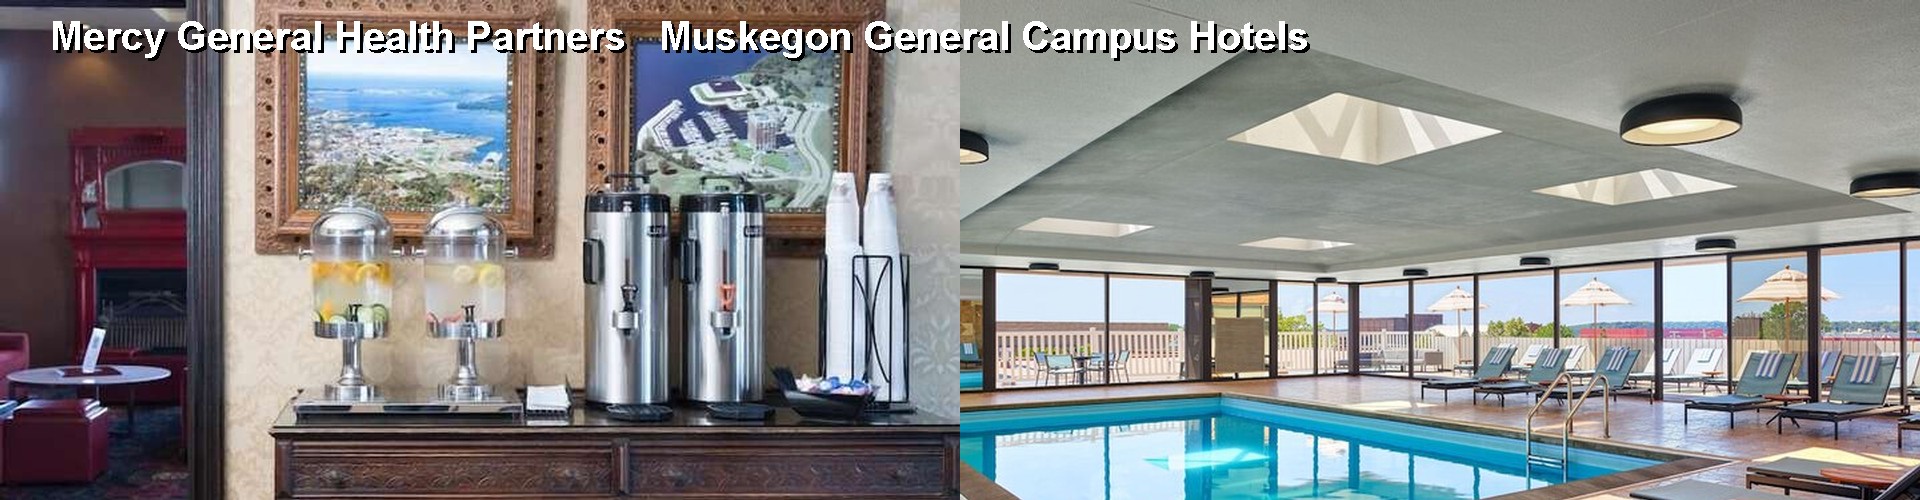 4 Best Hotels near Mercy General Health Partners   Muskegon General Campus